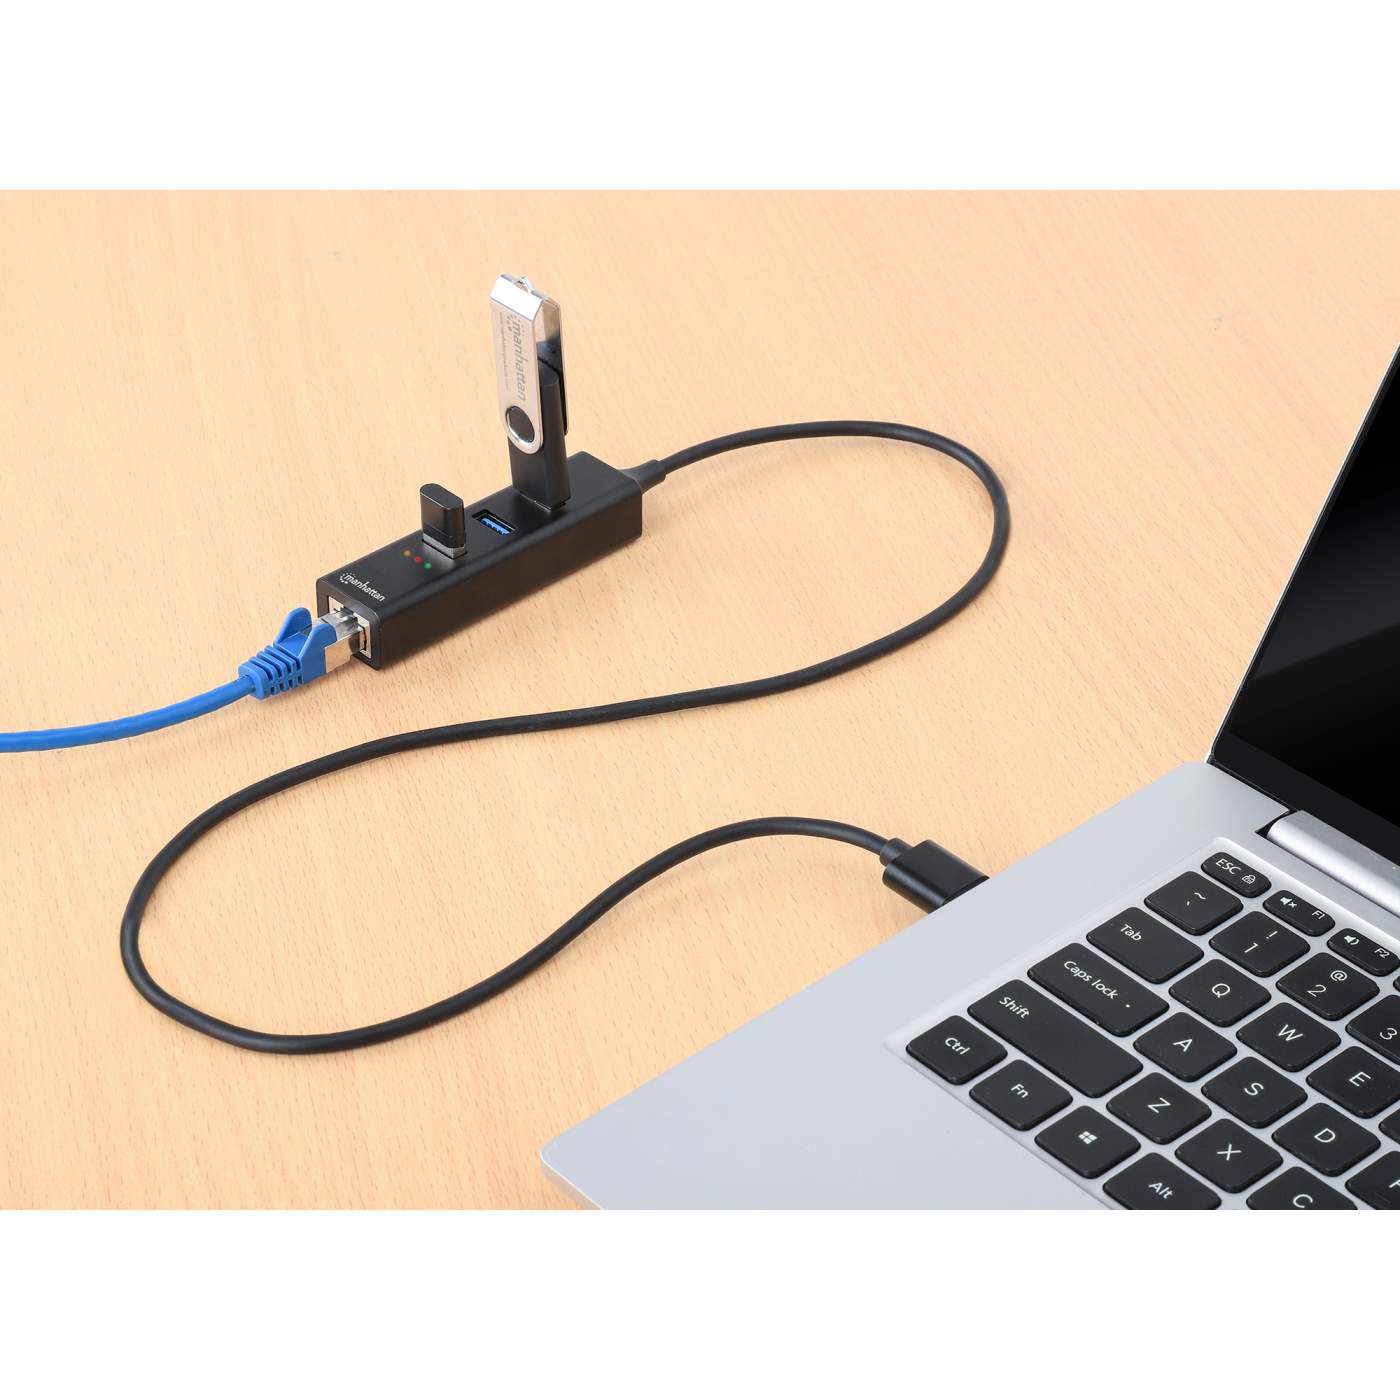 3-Port USB 3.0 Type-C/A Combo Hub with Gigabit Ethernet Network Adapter Image 8